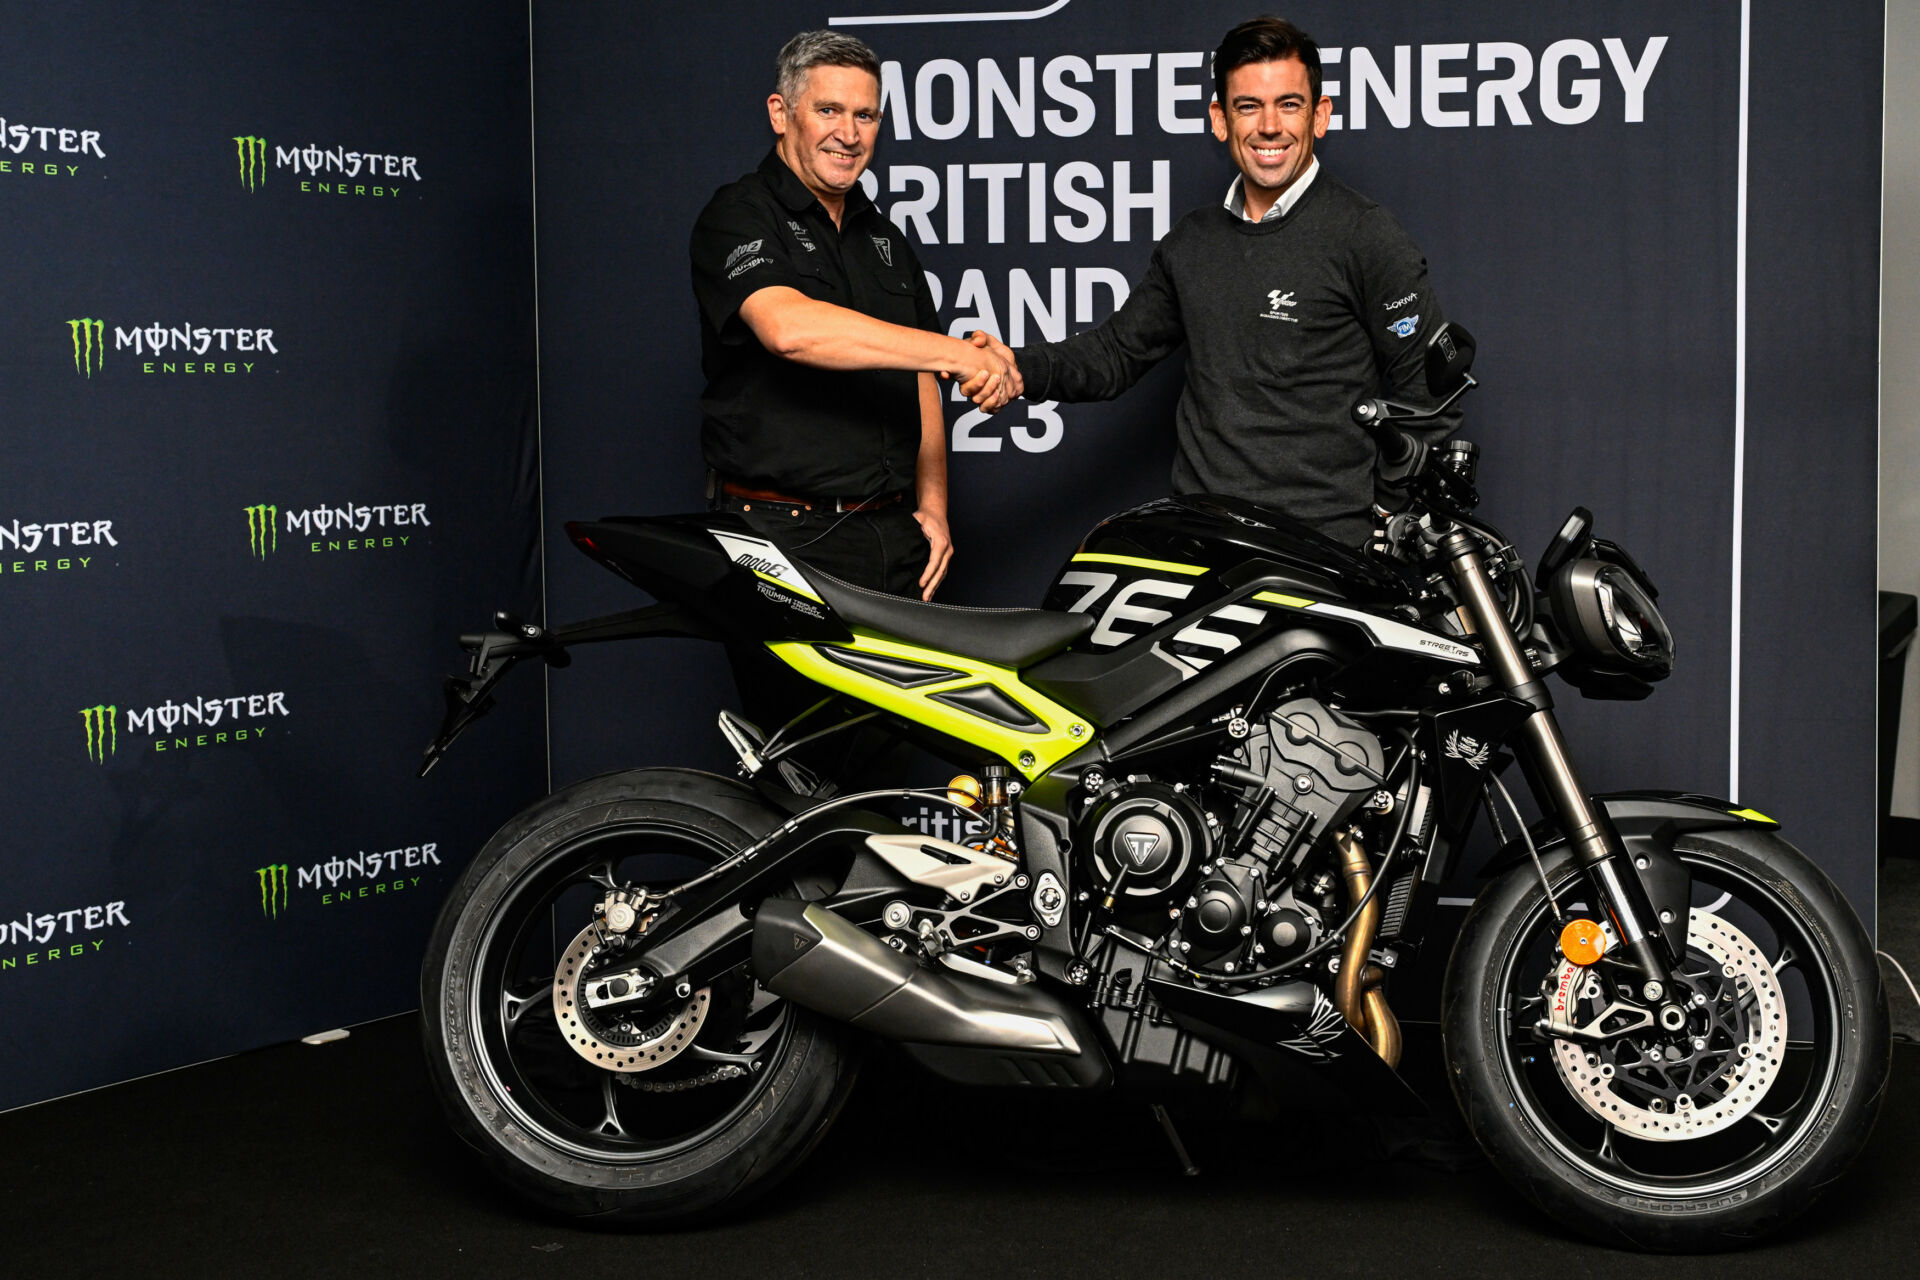 Steve Sargent, Chief Product Officer of Triumph Motorcycles (left) and Carlos Ezpeleta, Chief Sporting Officer at Dorna Sports. Photo courtesy Dorna.